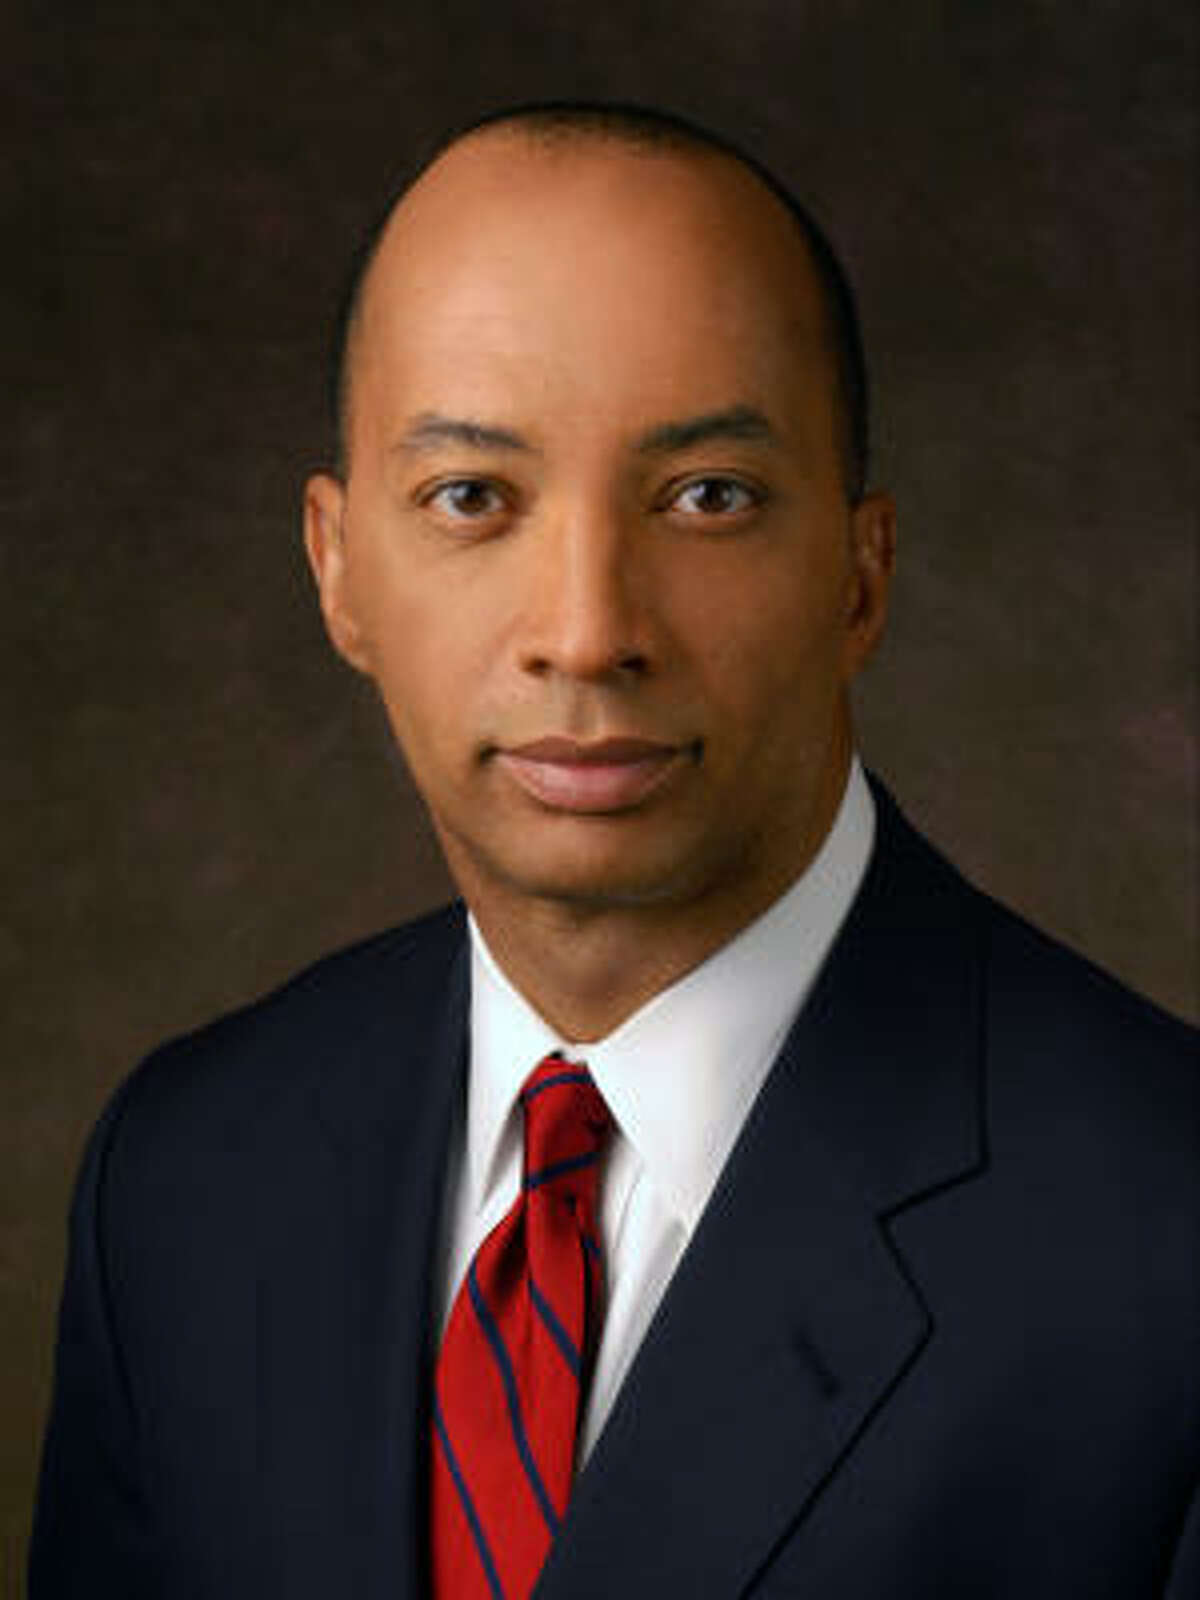 Byron Pitts is chief national correspondent for CBS News and contributing correspondent to 60 Minutes.